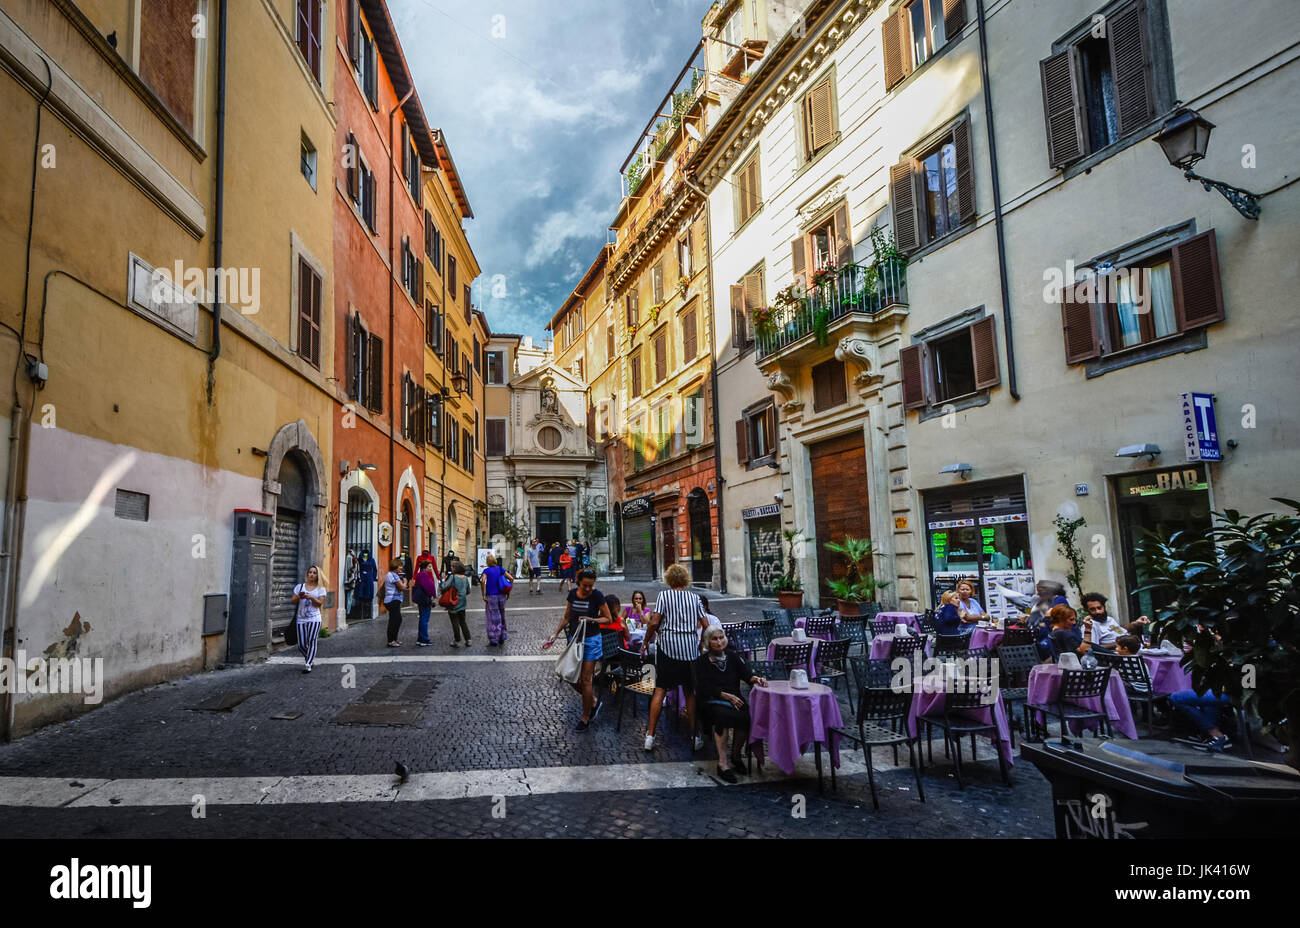 Small out of the way piazza off the beaten path in Rome Italy with an old woman sitting alone at a cafe while younger italians go about their day Stock Photo